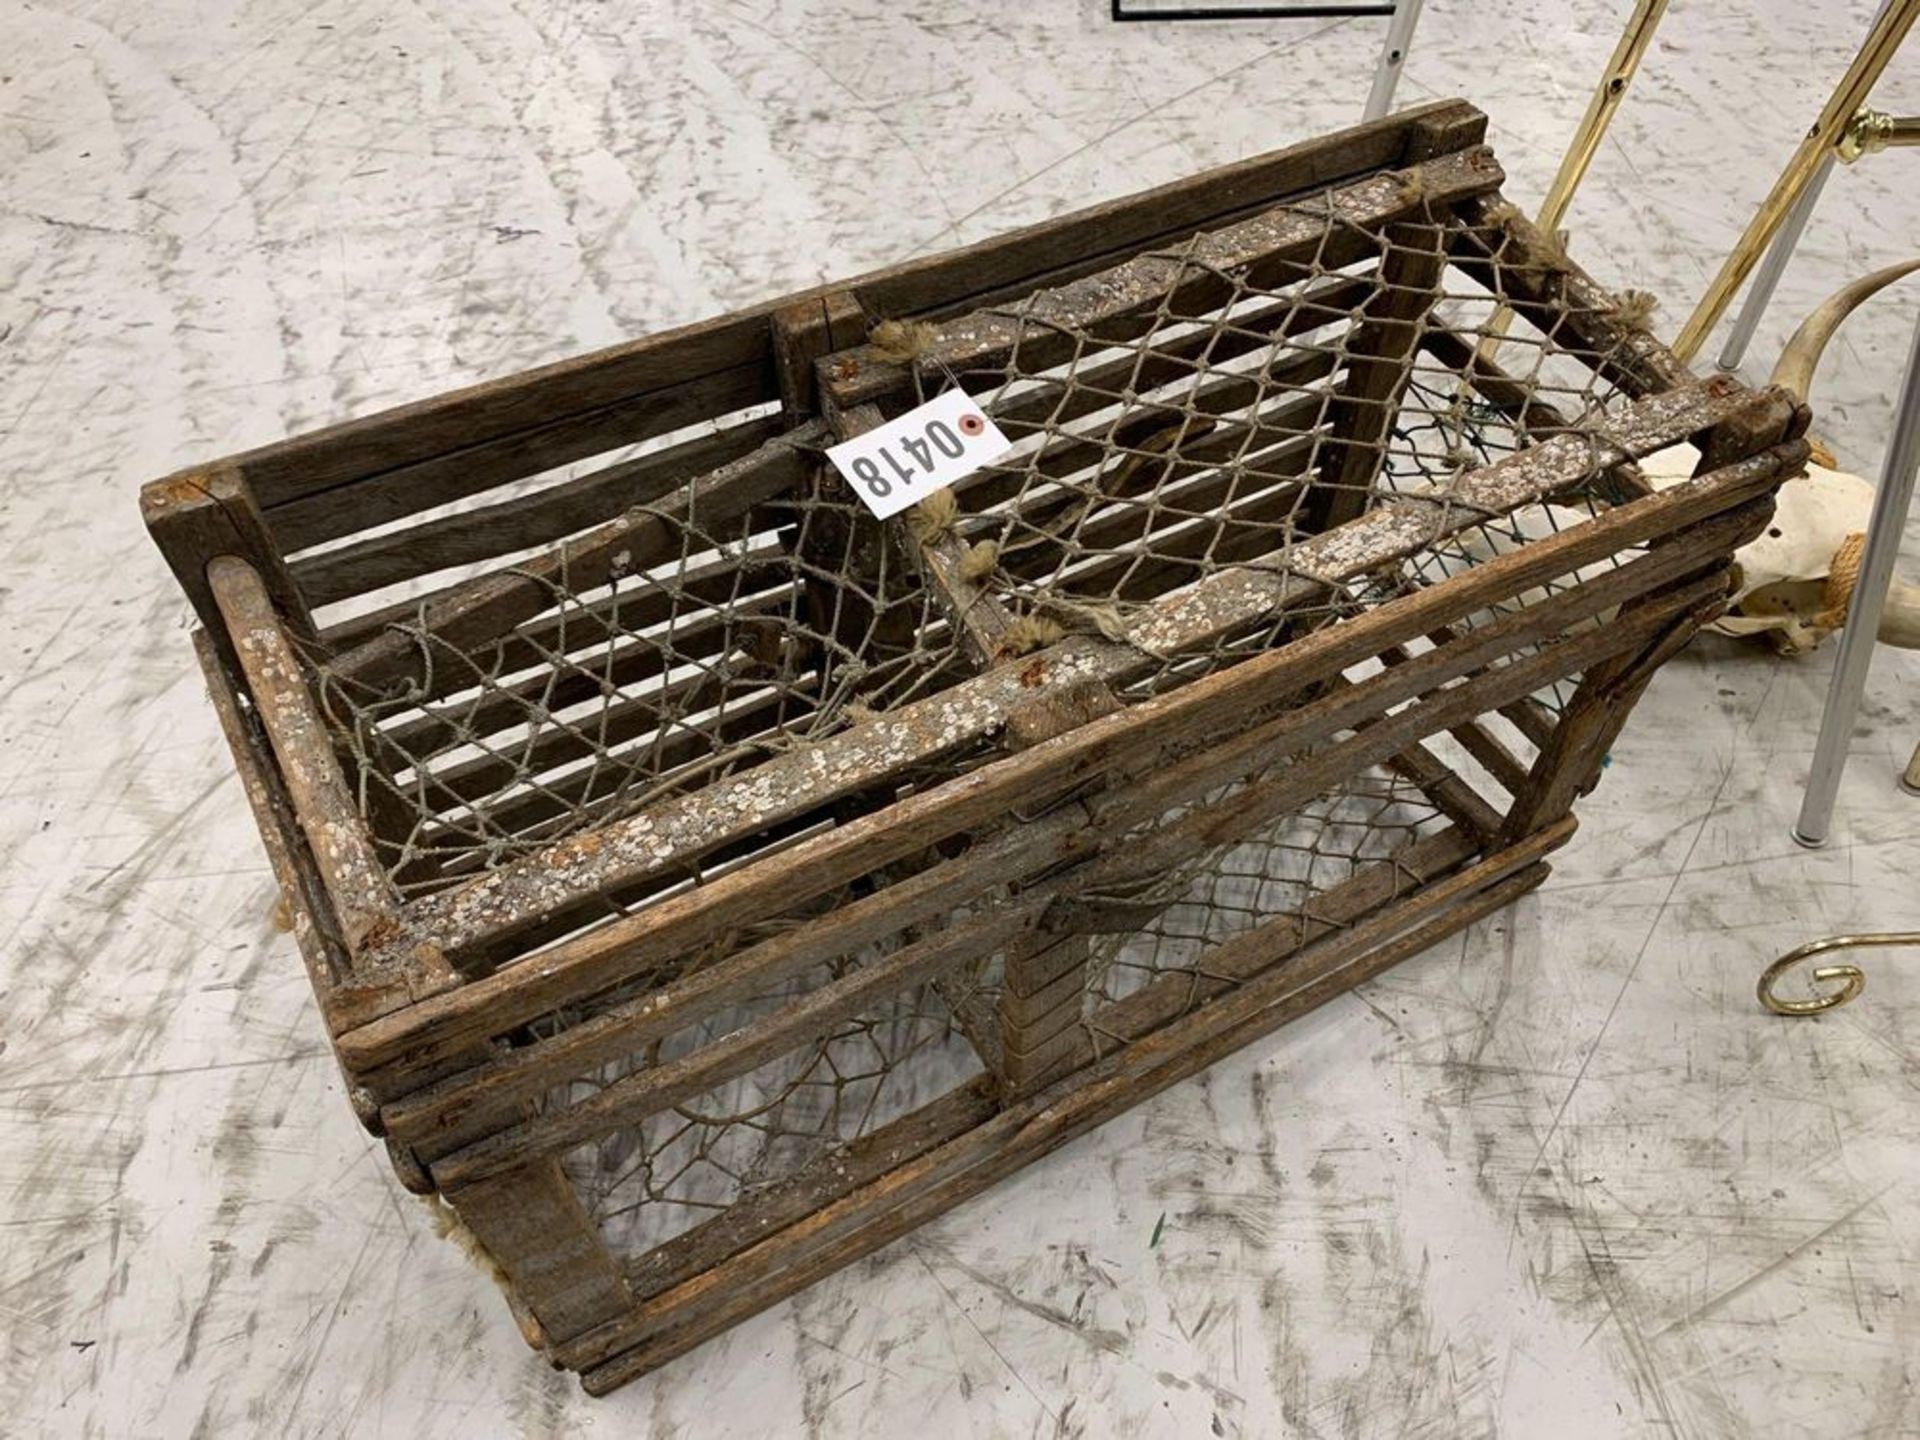 Lobster Trap - Image 2 of 3